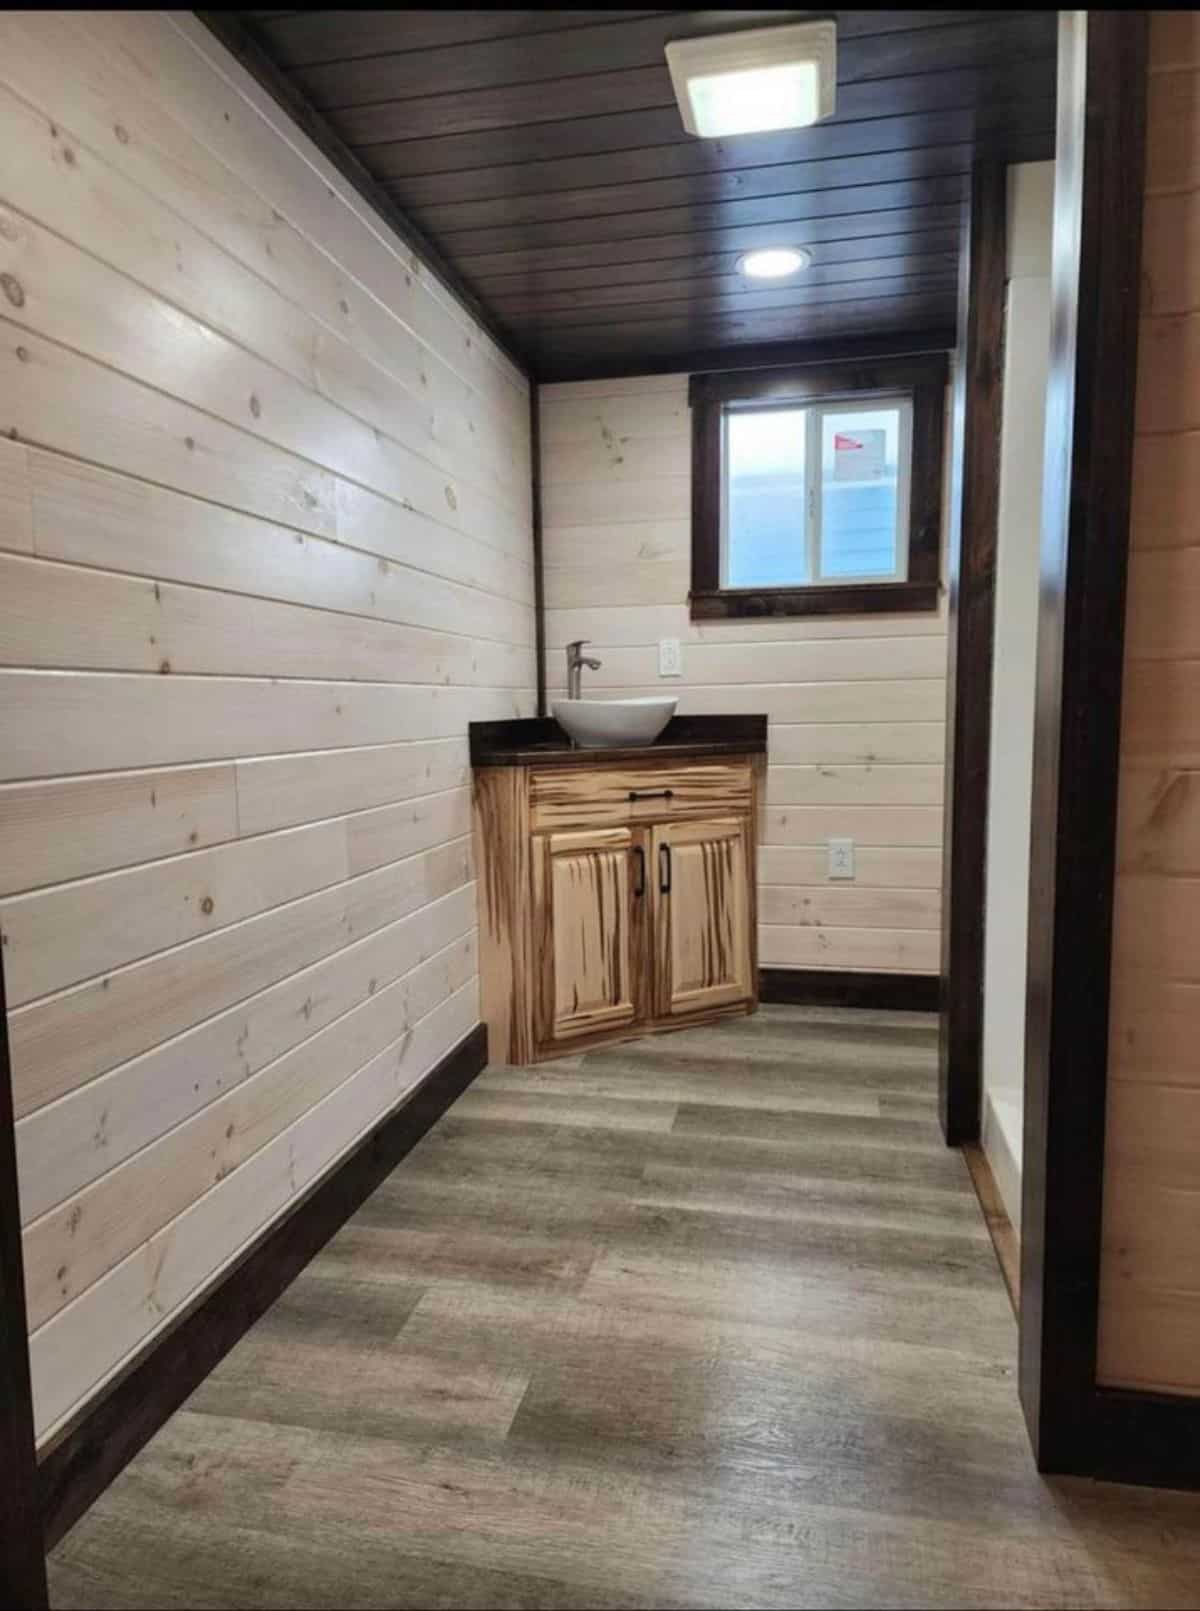 wooden floor and walls of spacious tiny home